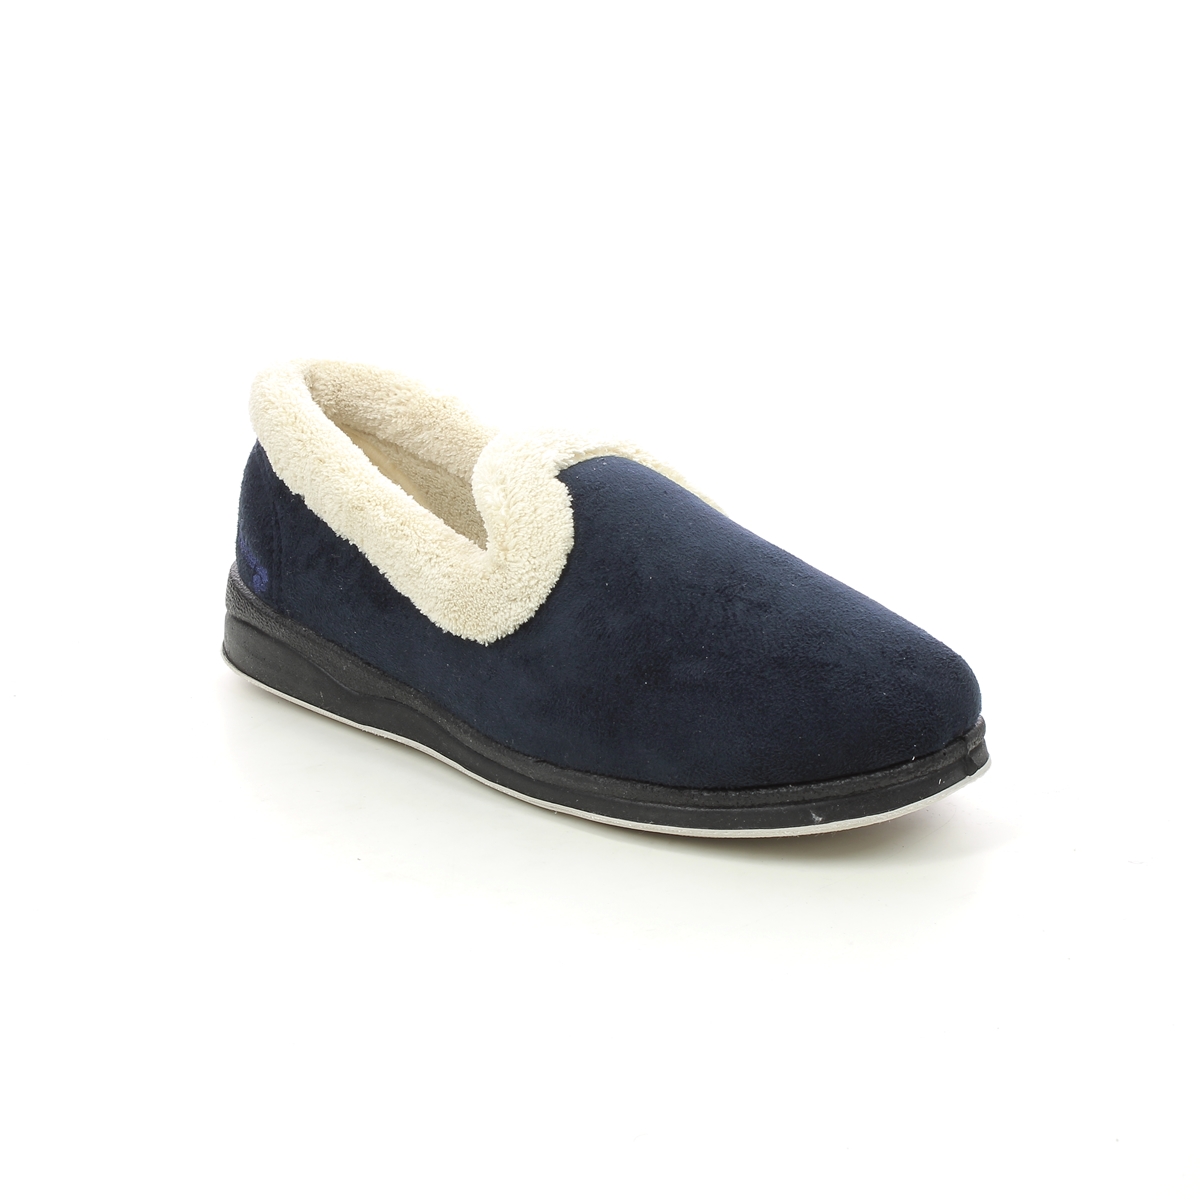 Padders Repose Navy Womens slippers 406-24 in a Plain Textile in Size 5